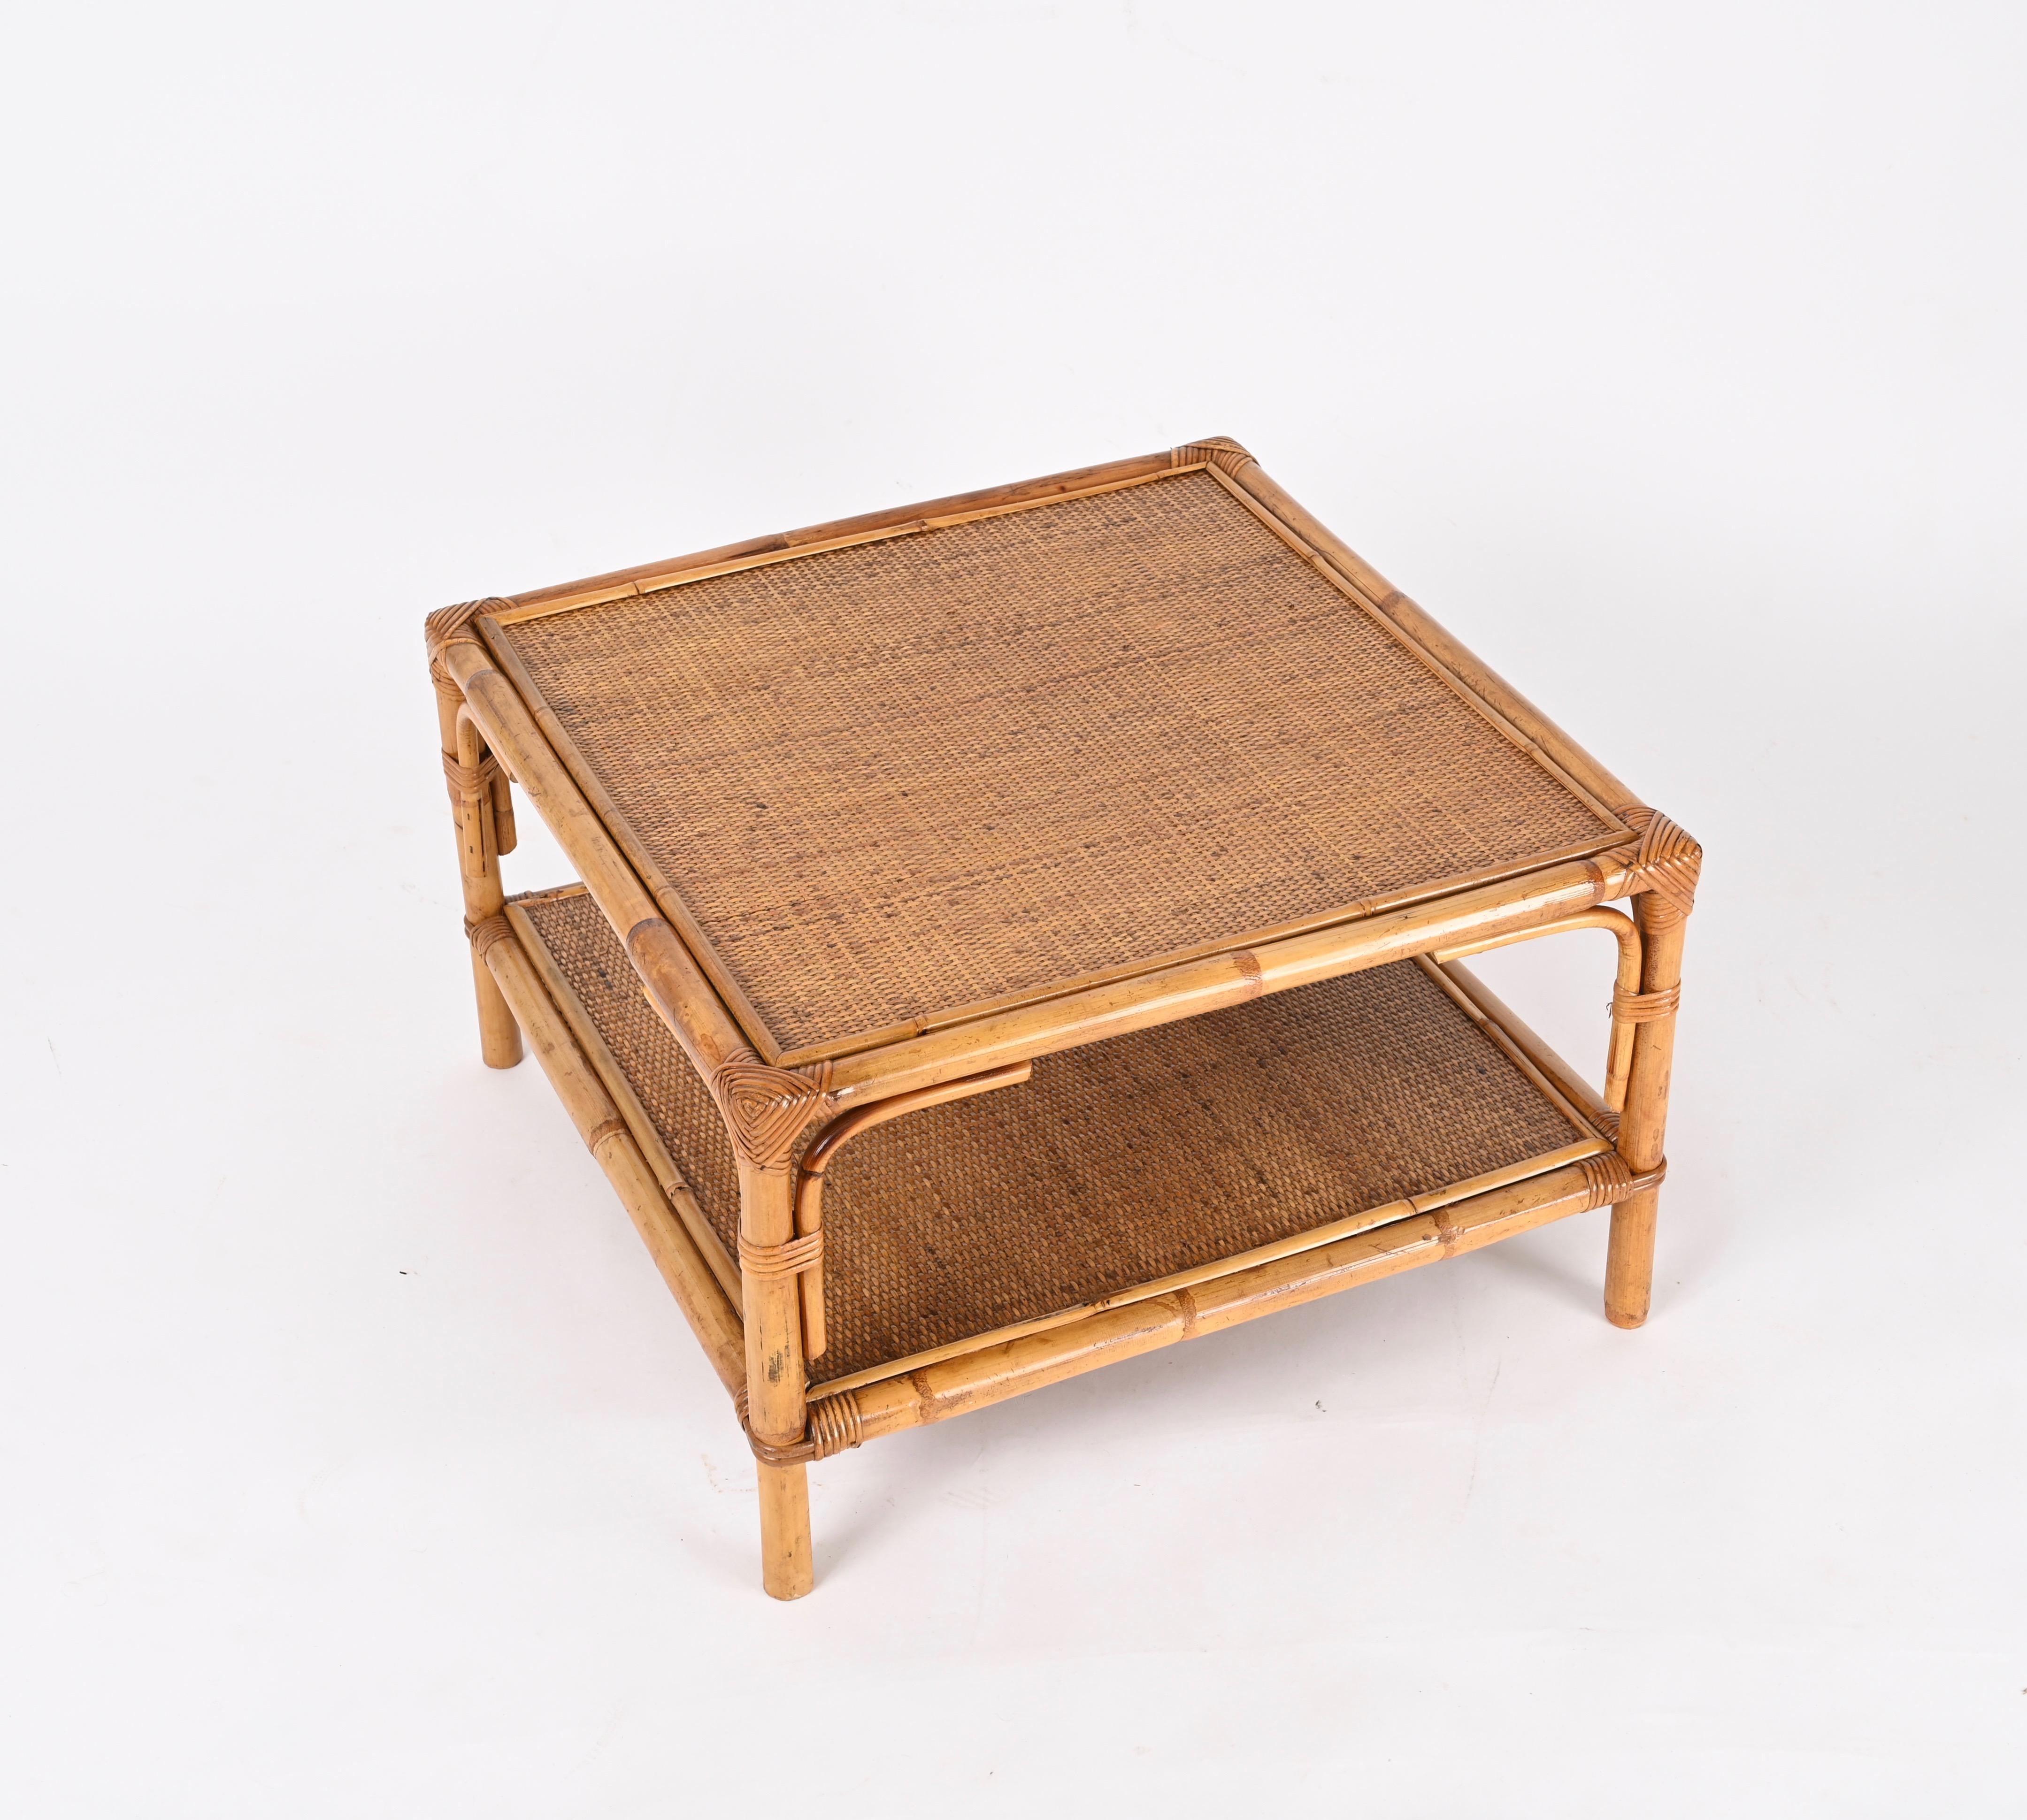 Vivai del Sud Midcentury Italian Square Coffee Table in Bamboo and Rattan, 1970s 4